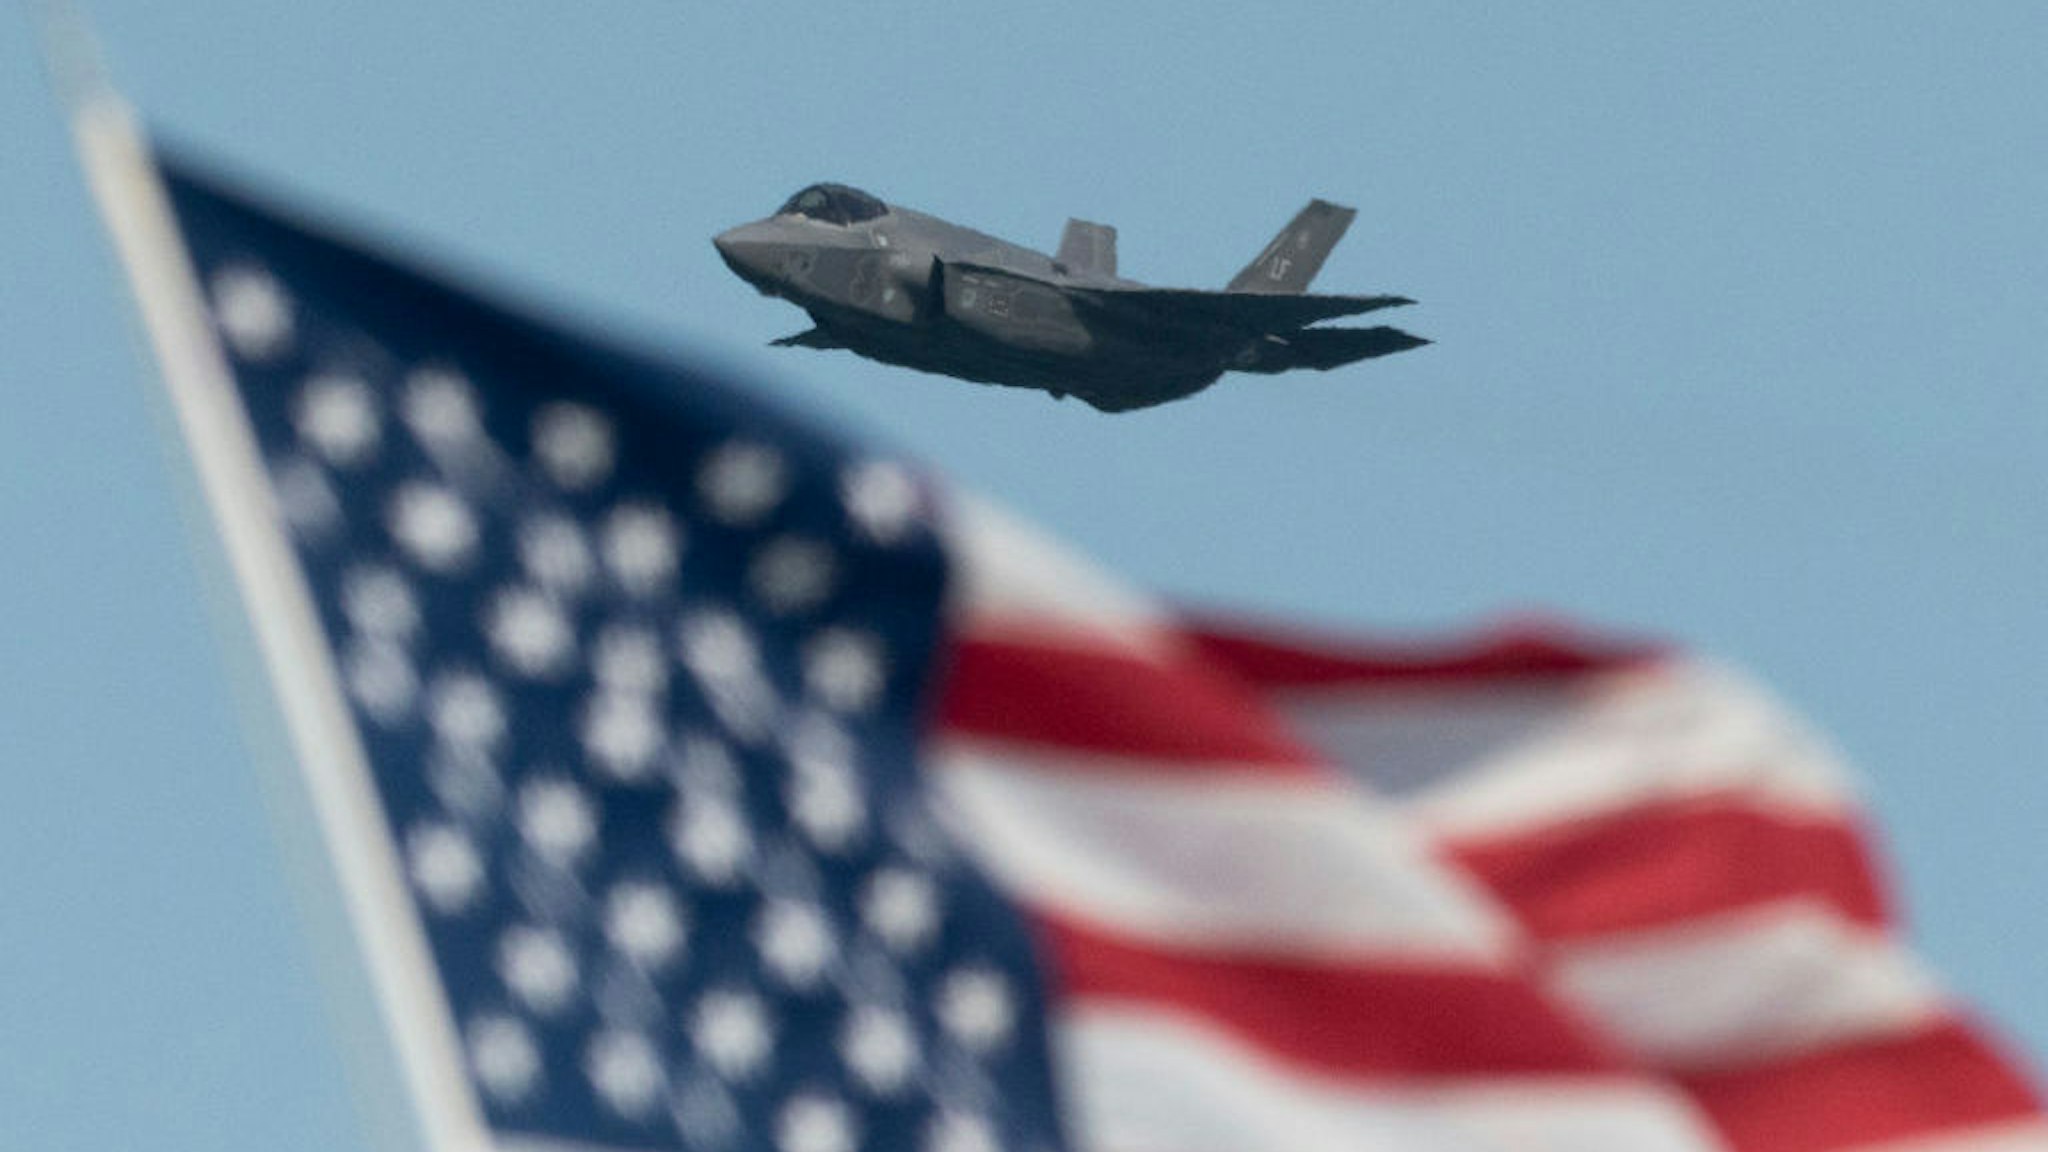 U.S. Air Force Lockheed Martin F-35 Lightning stealth fighter flies over the San Francisco Bay in San Francisco, California on October 13, 2019. (Photo by Yichuan Cao/NurPhoto)